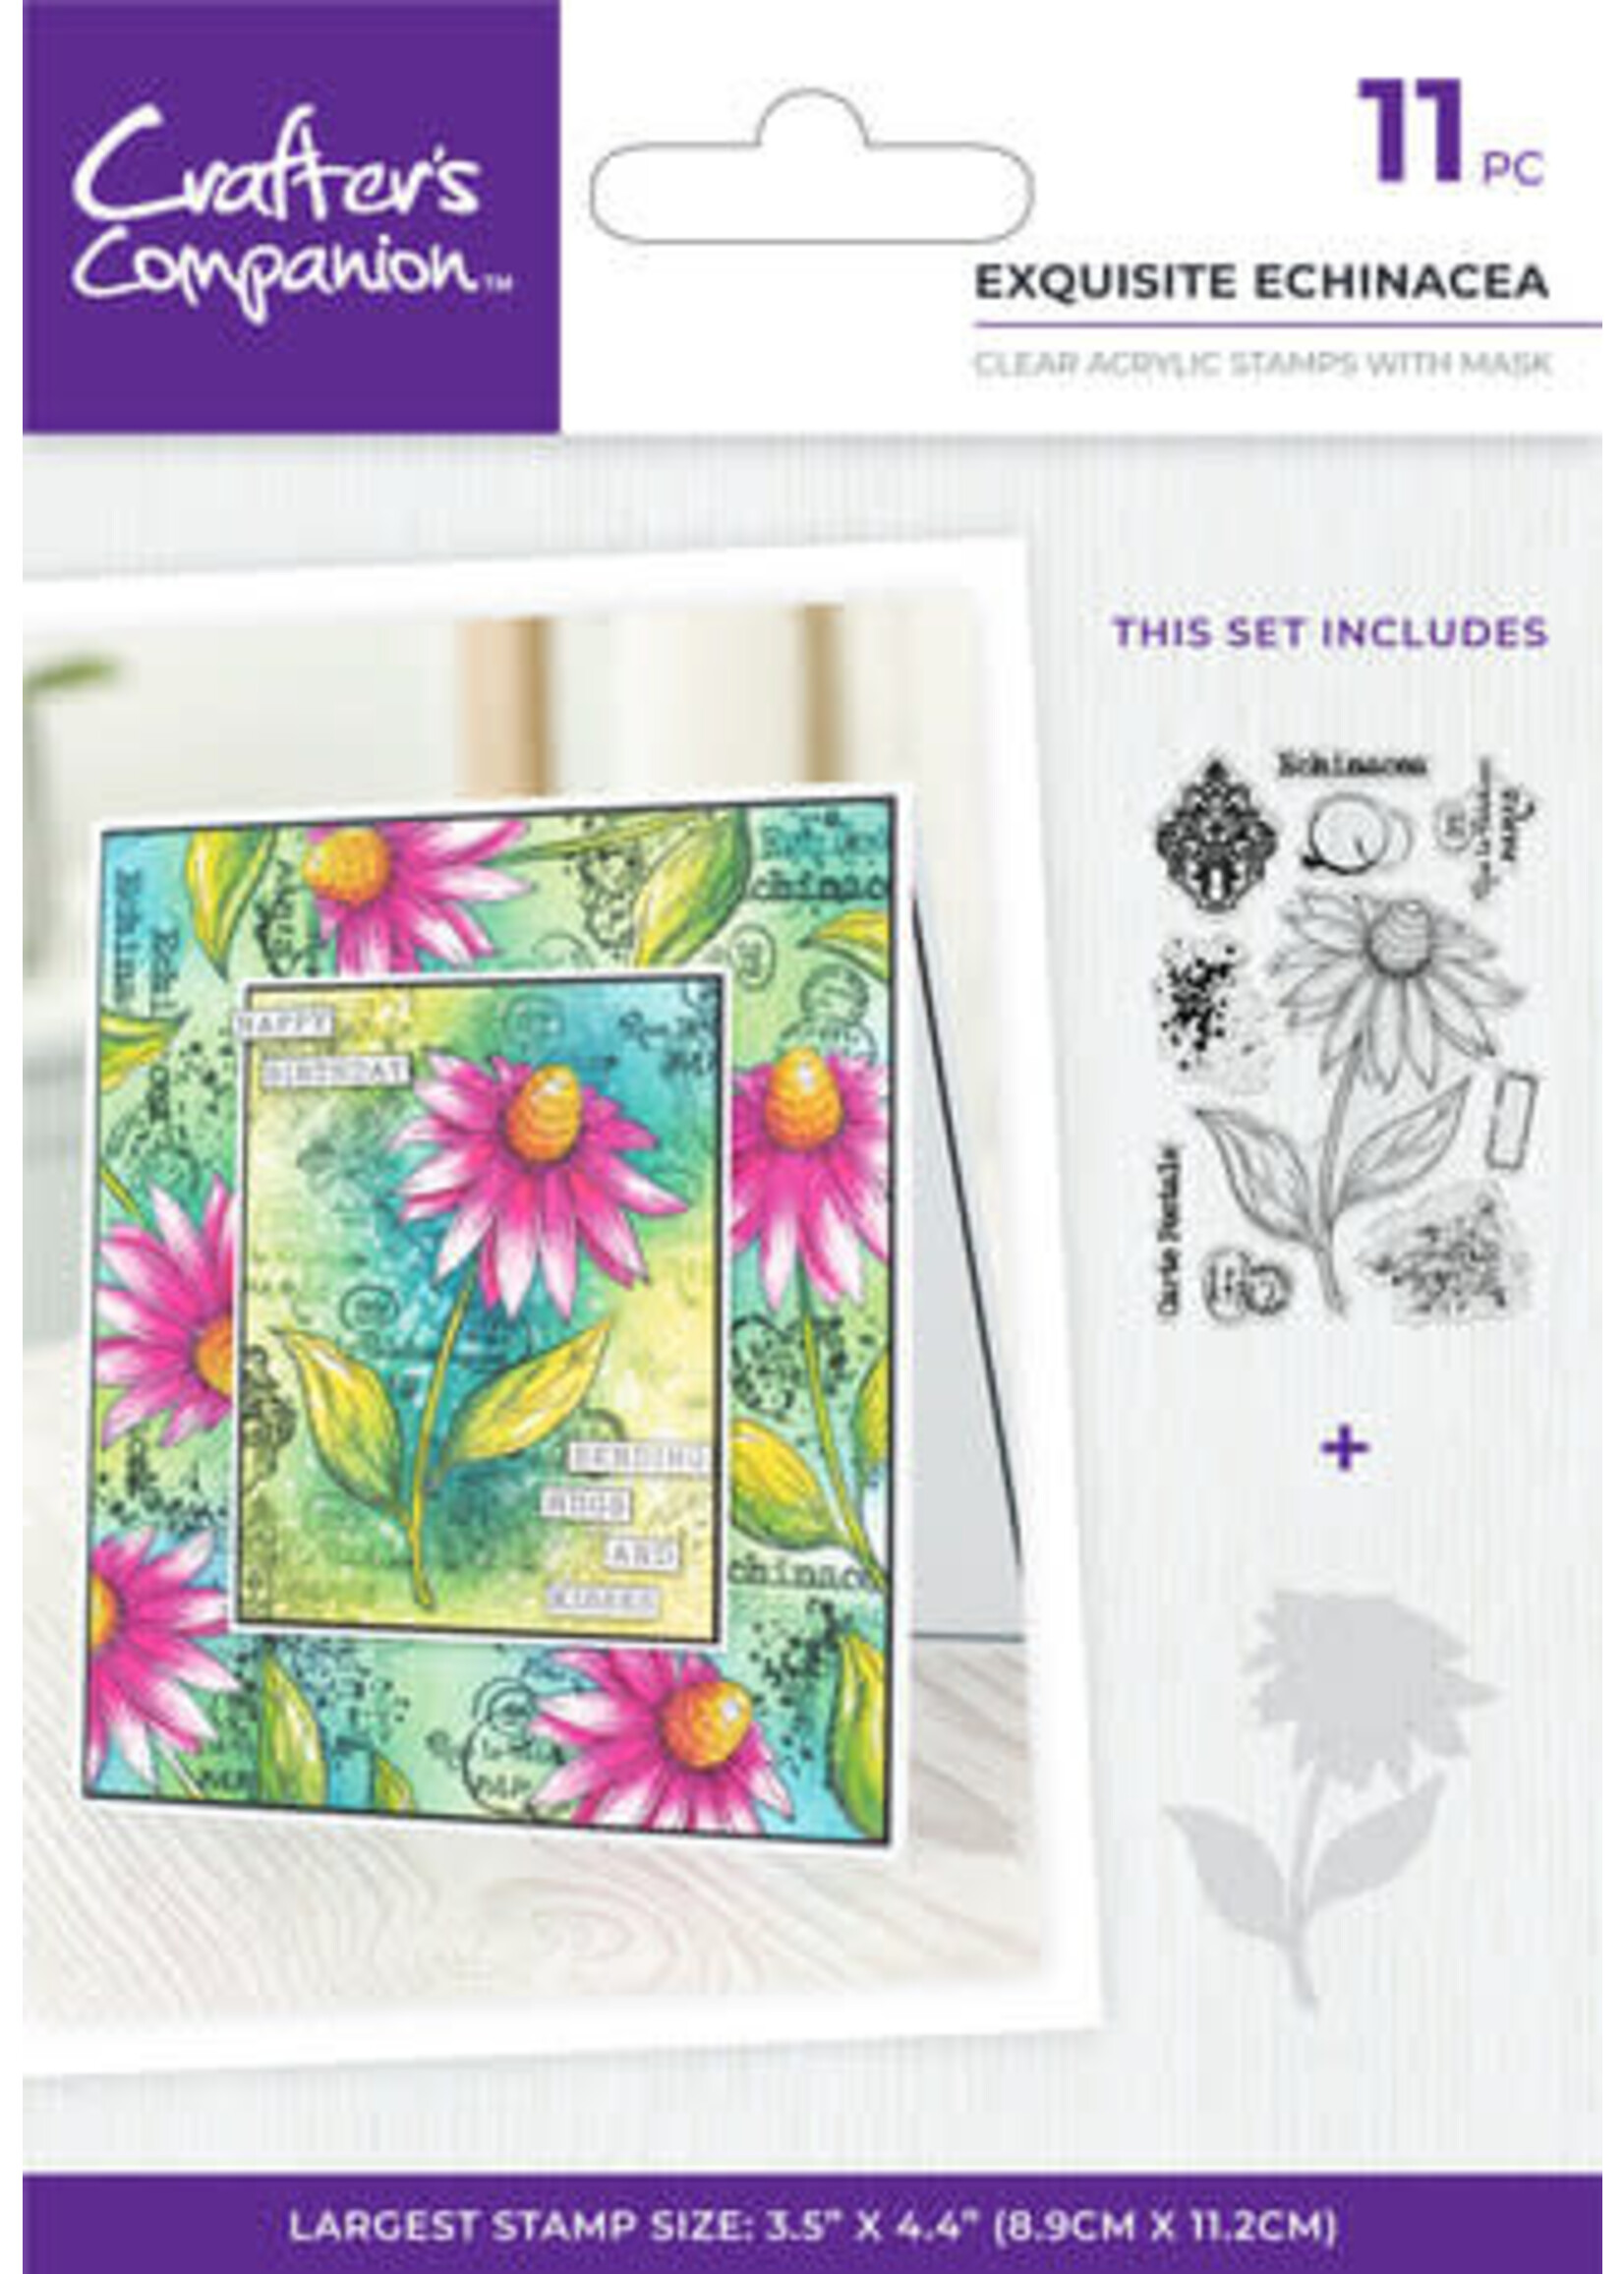 Crafters Companion Floral Collage Clear Stamp w/ Mask 4x6 Inch Exquisite Echinacea (CC-CA-ST-EXECH)